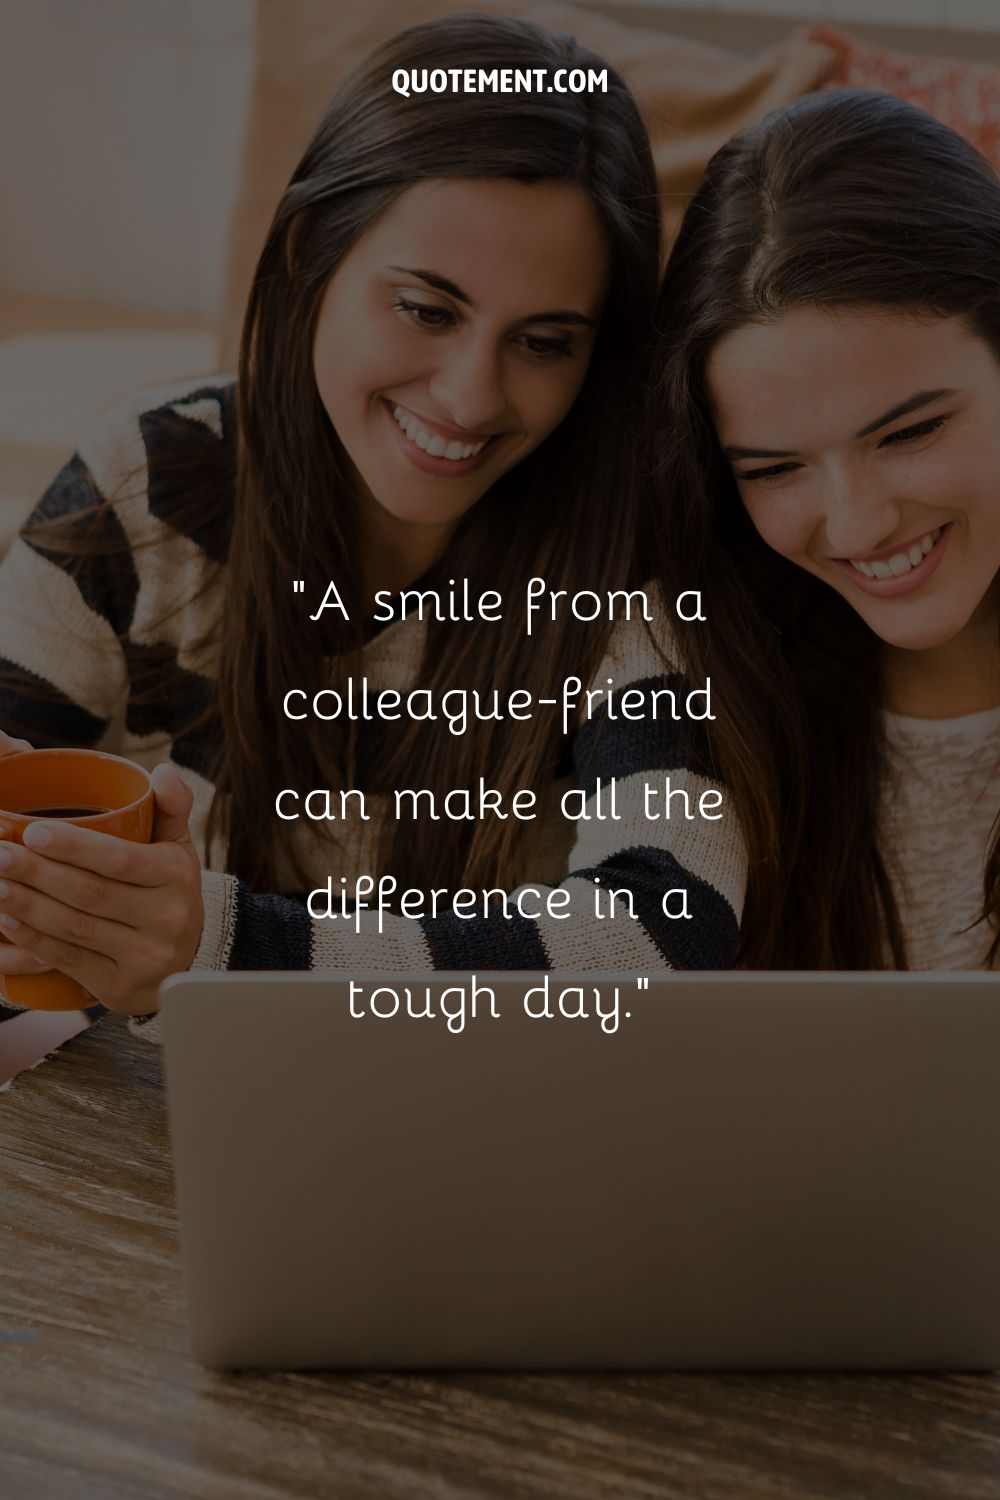 two girls laughing and looking at a macbook representing work friendship quotes
